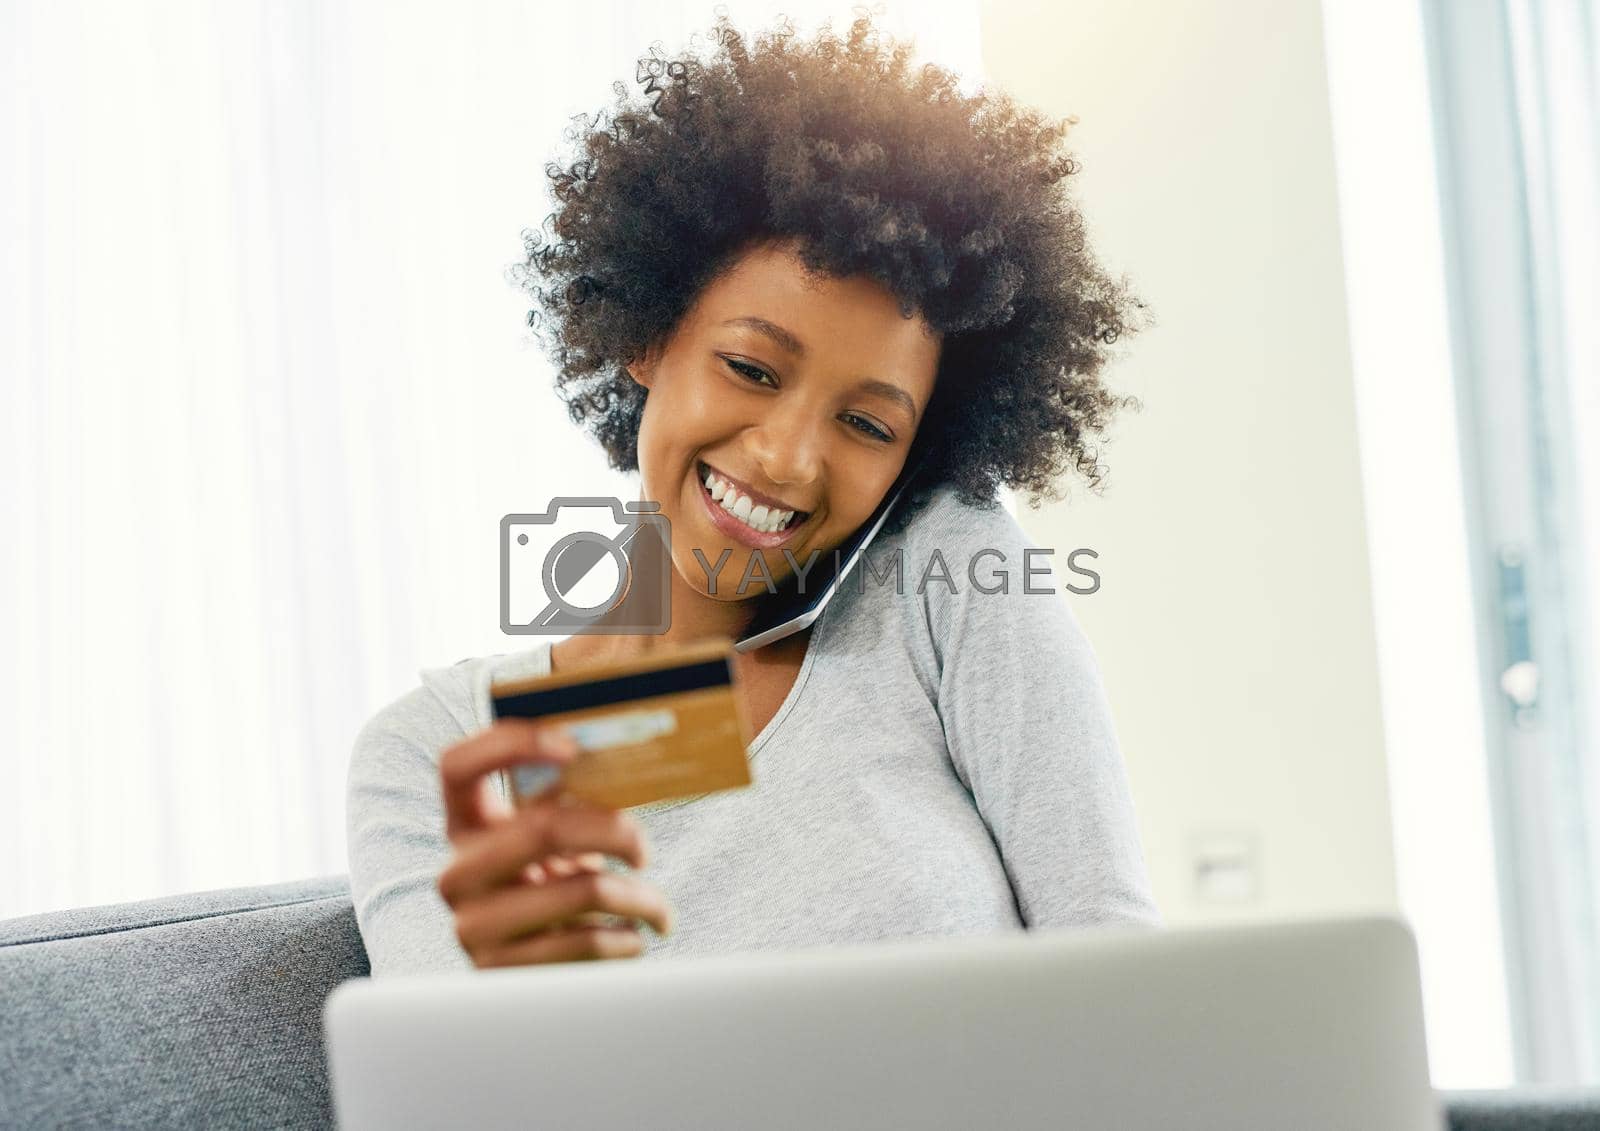 Royalty free image of Sure, Ive got the digits right here. Cropped shot of an attractive young woman using her laptop to shop online at home over the weekend. by YuriArcurs